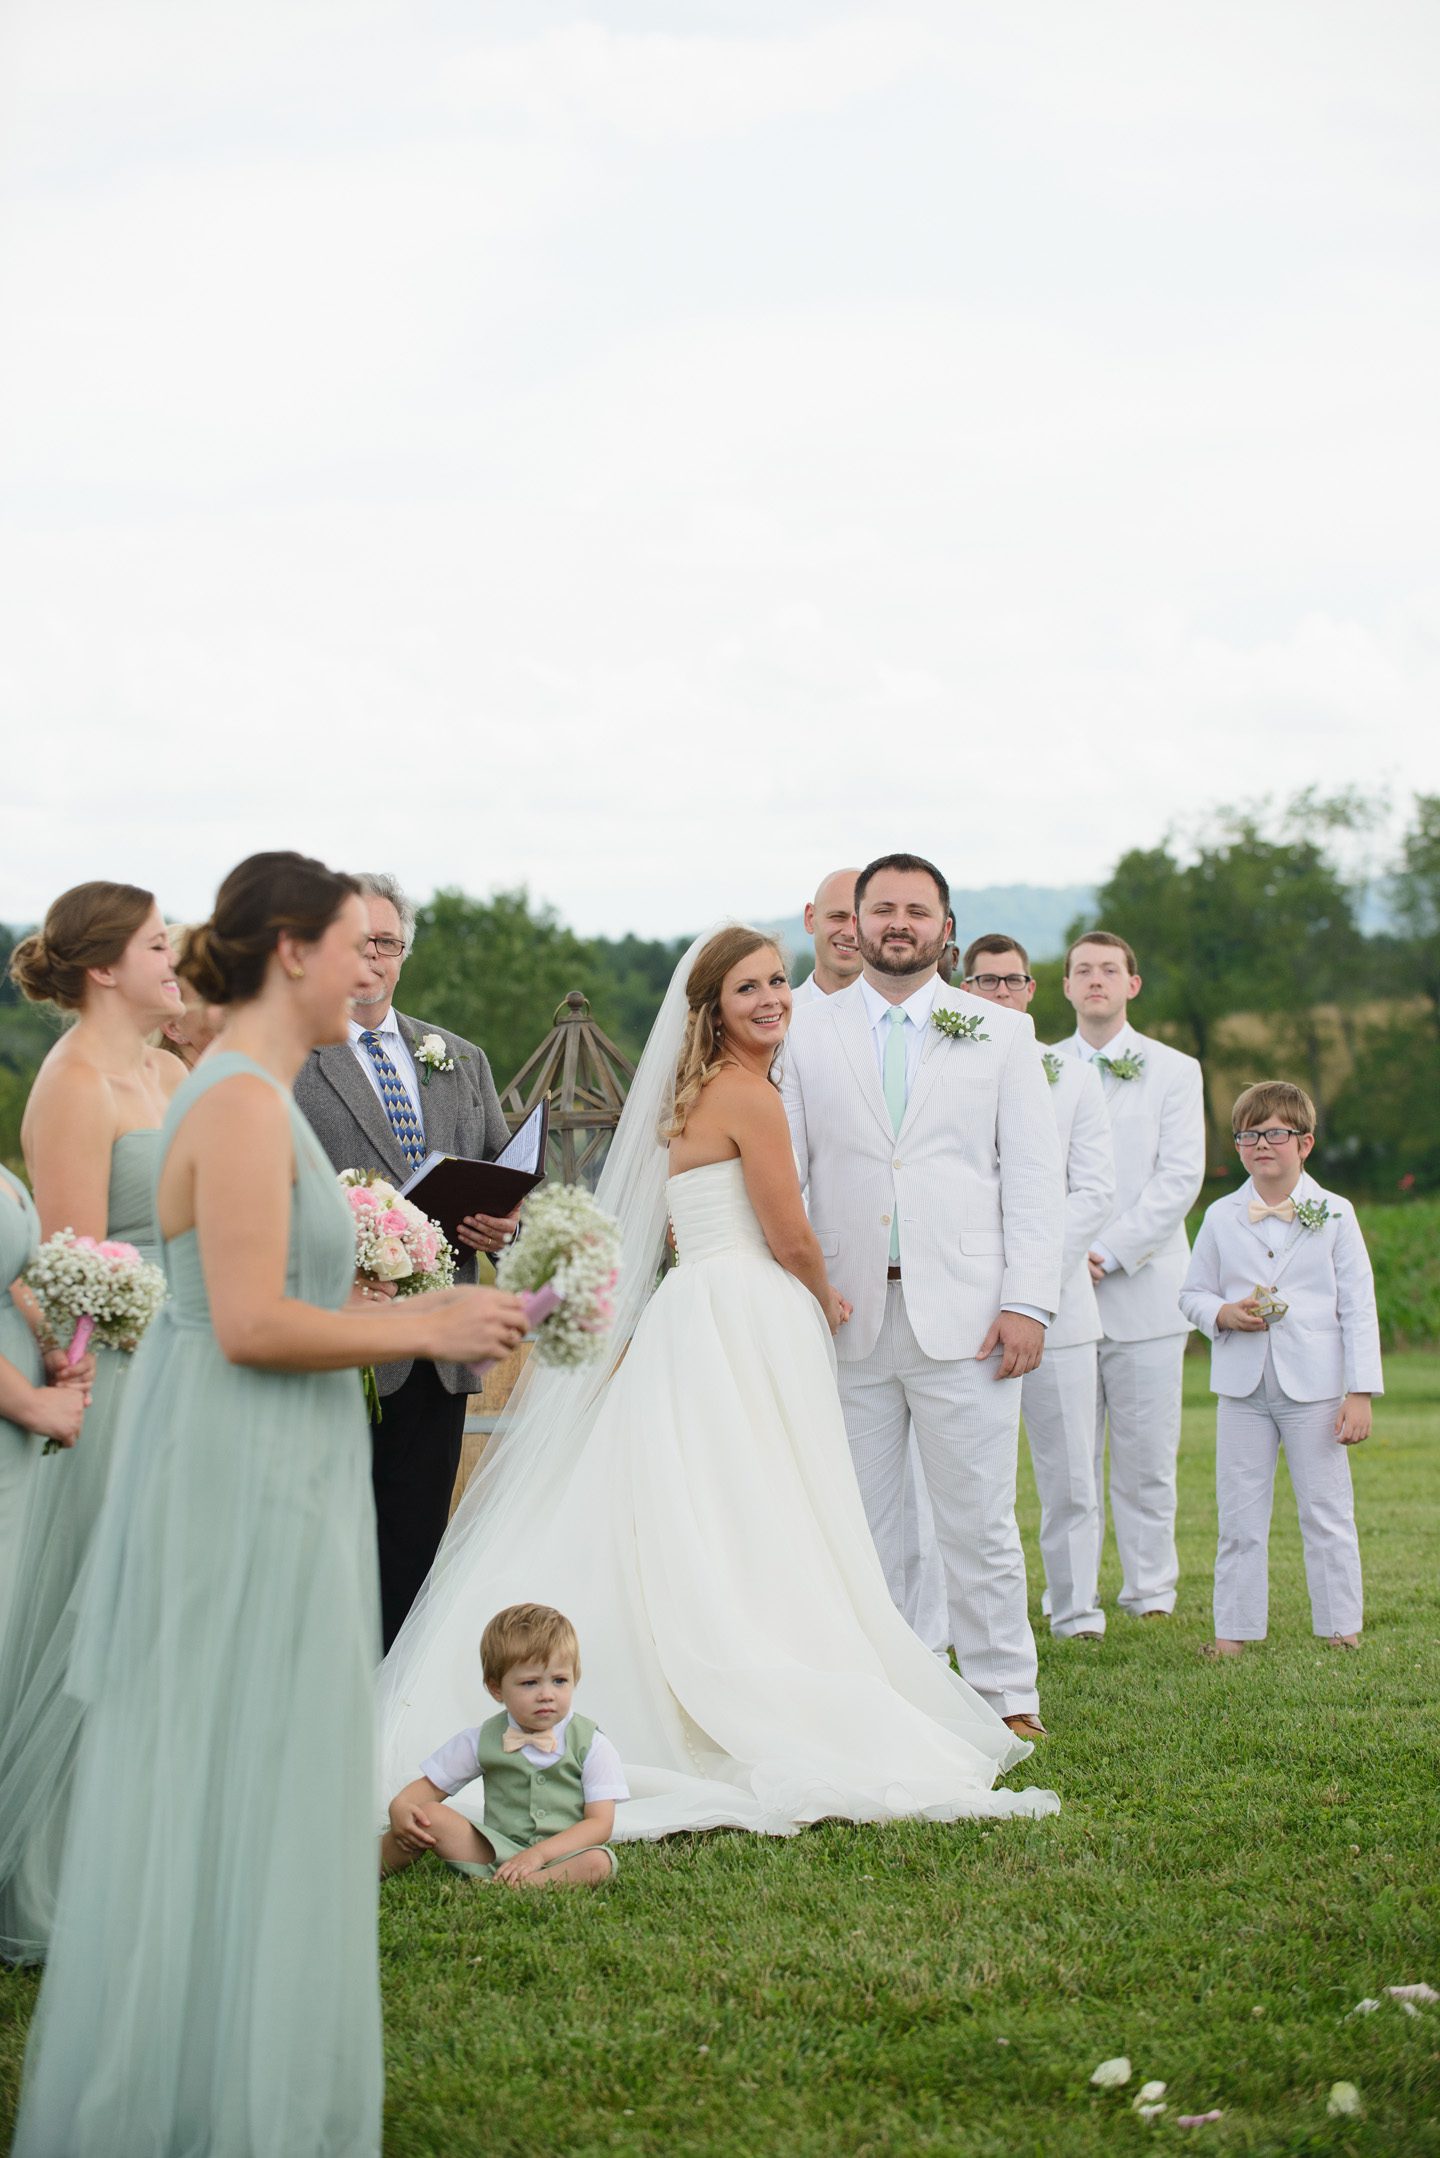 Kelly and Nathan by Neil GT Photography Sinkland Farms Christiansburg VA Wedding Ceremony Reading